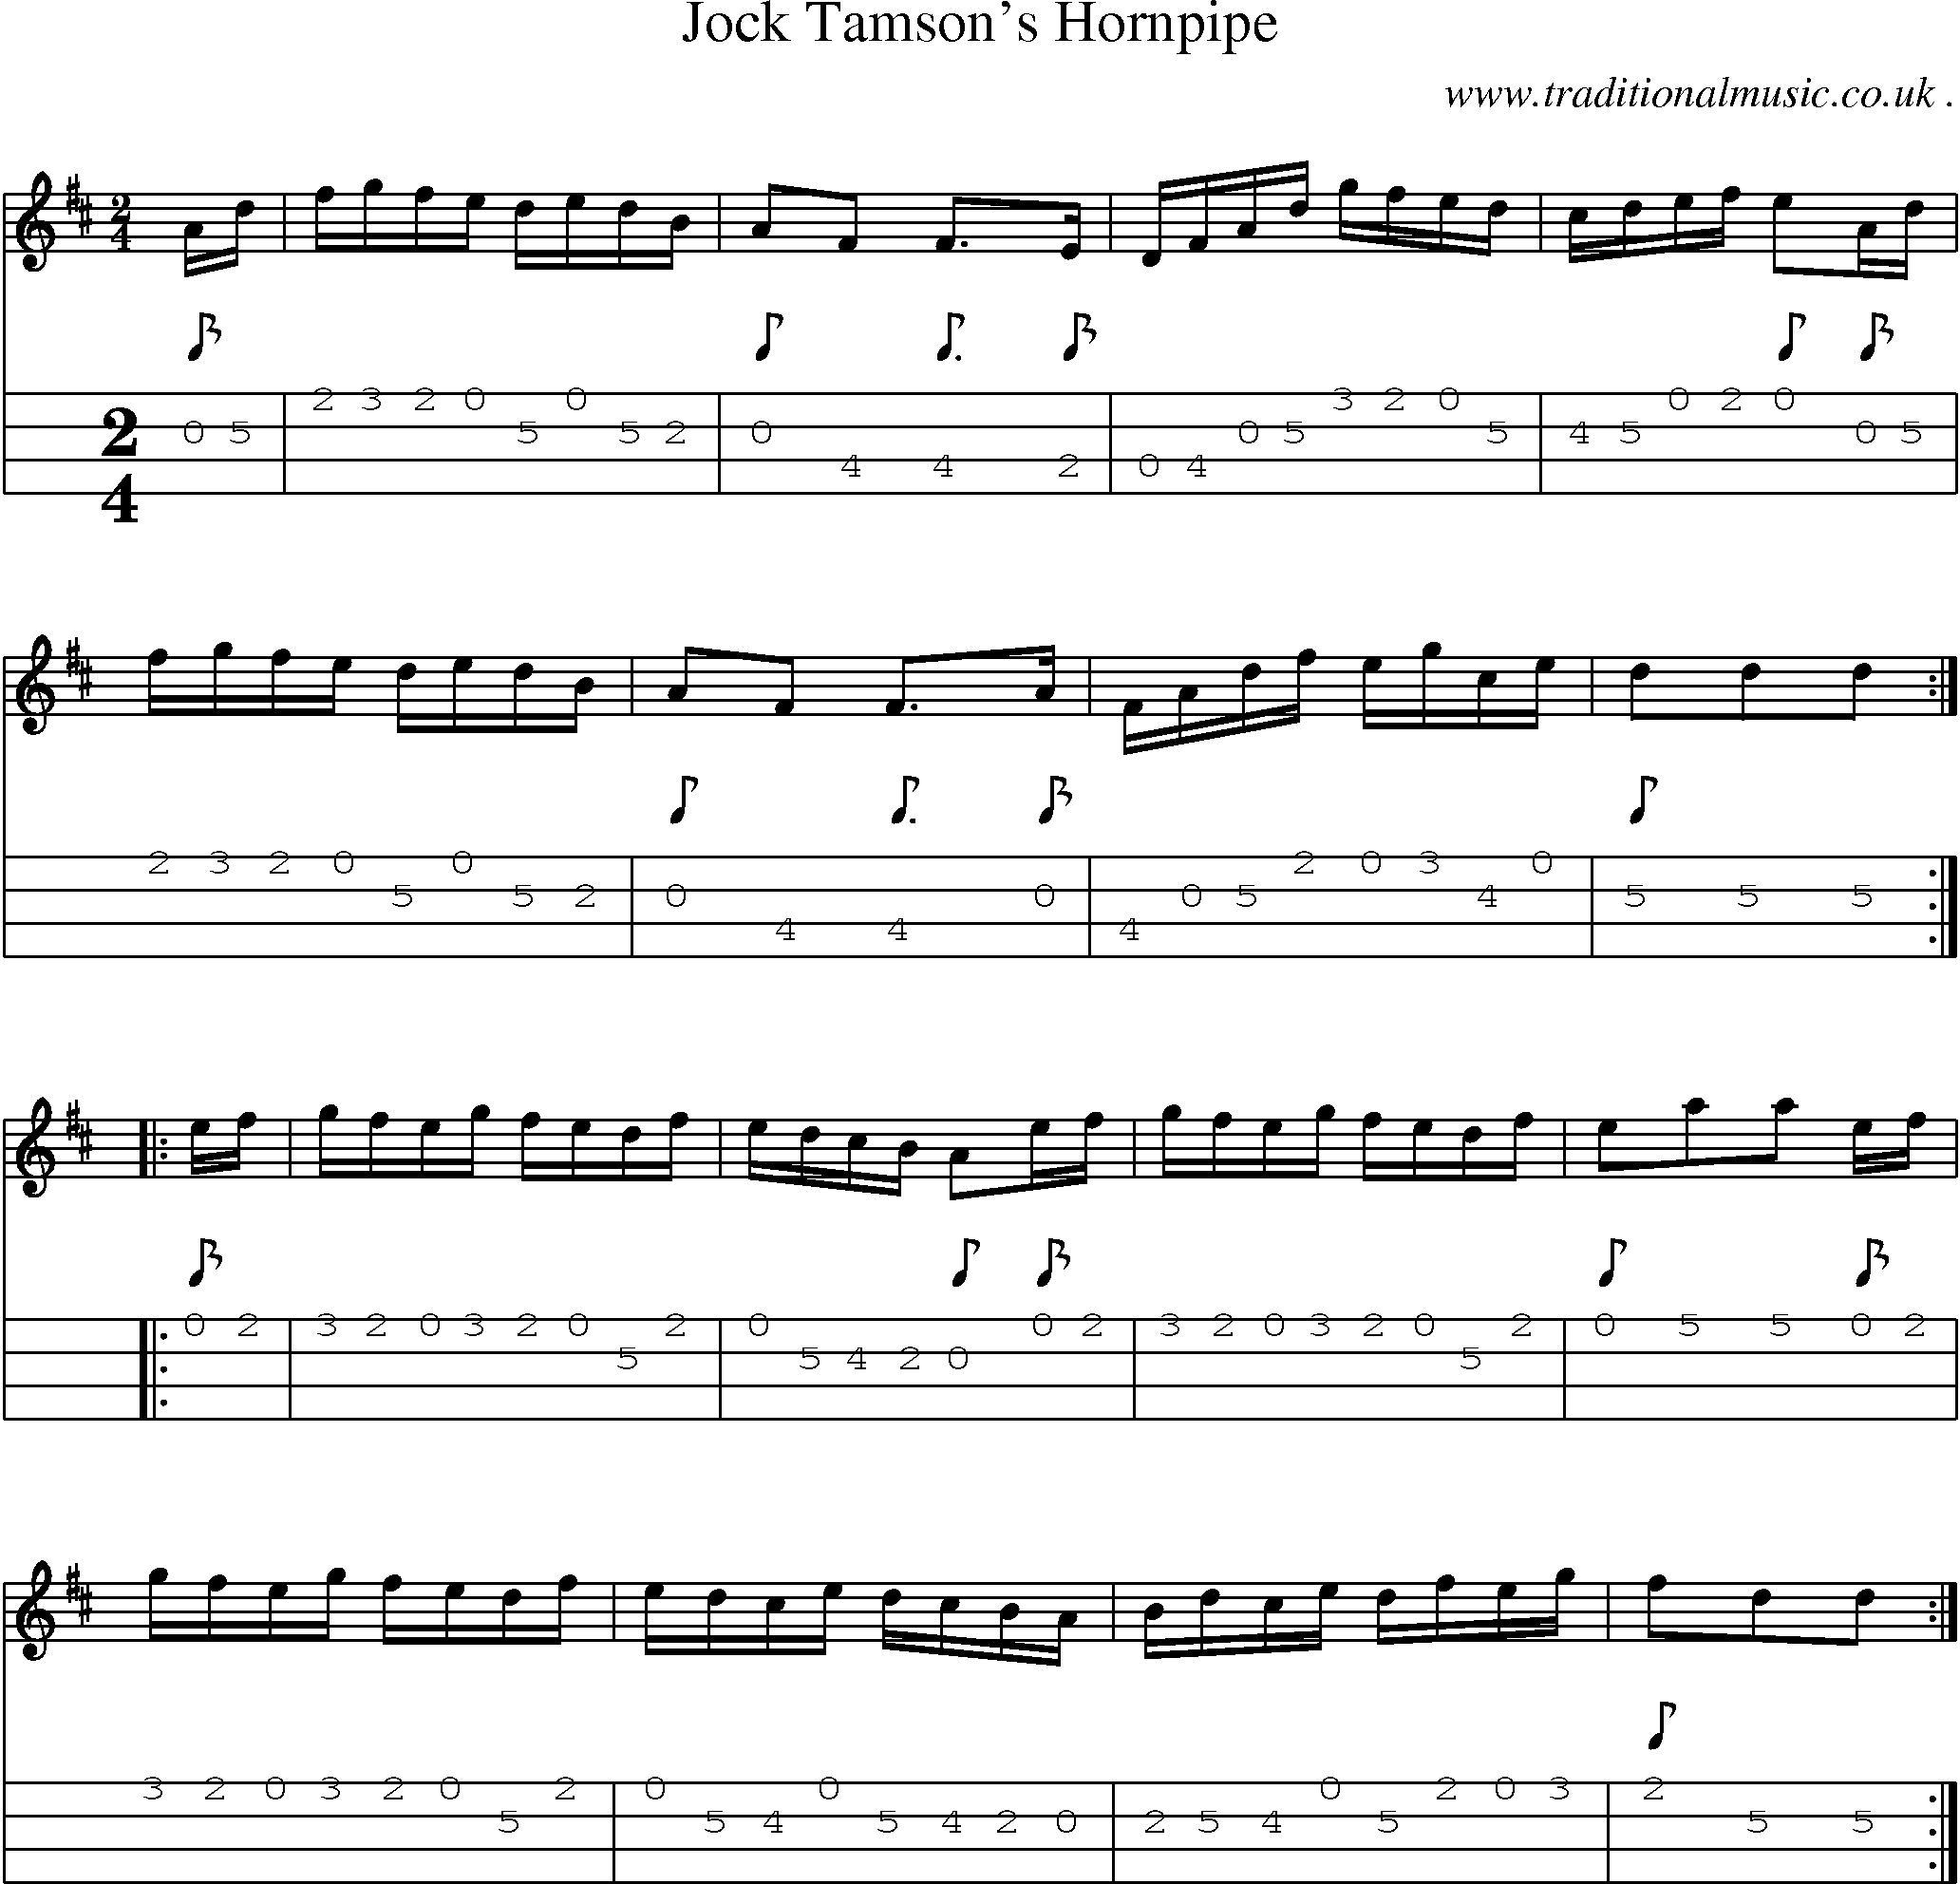 Sheet-Music and Mandolin Tabs for Jock Tamsons Hornpipe